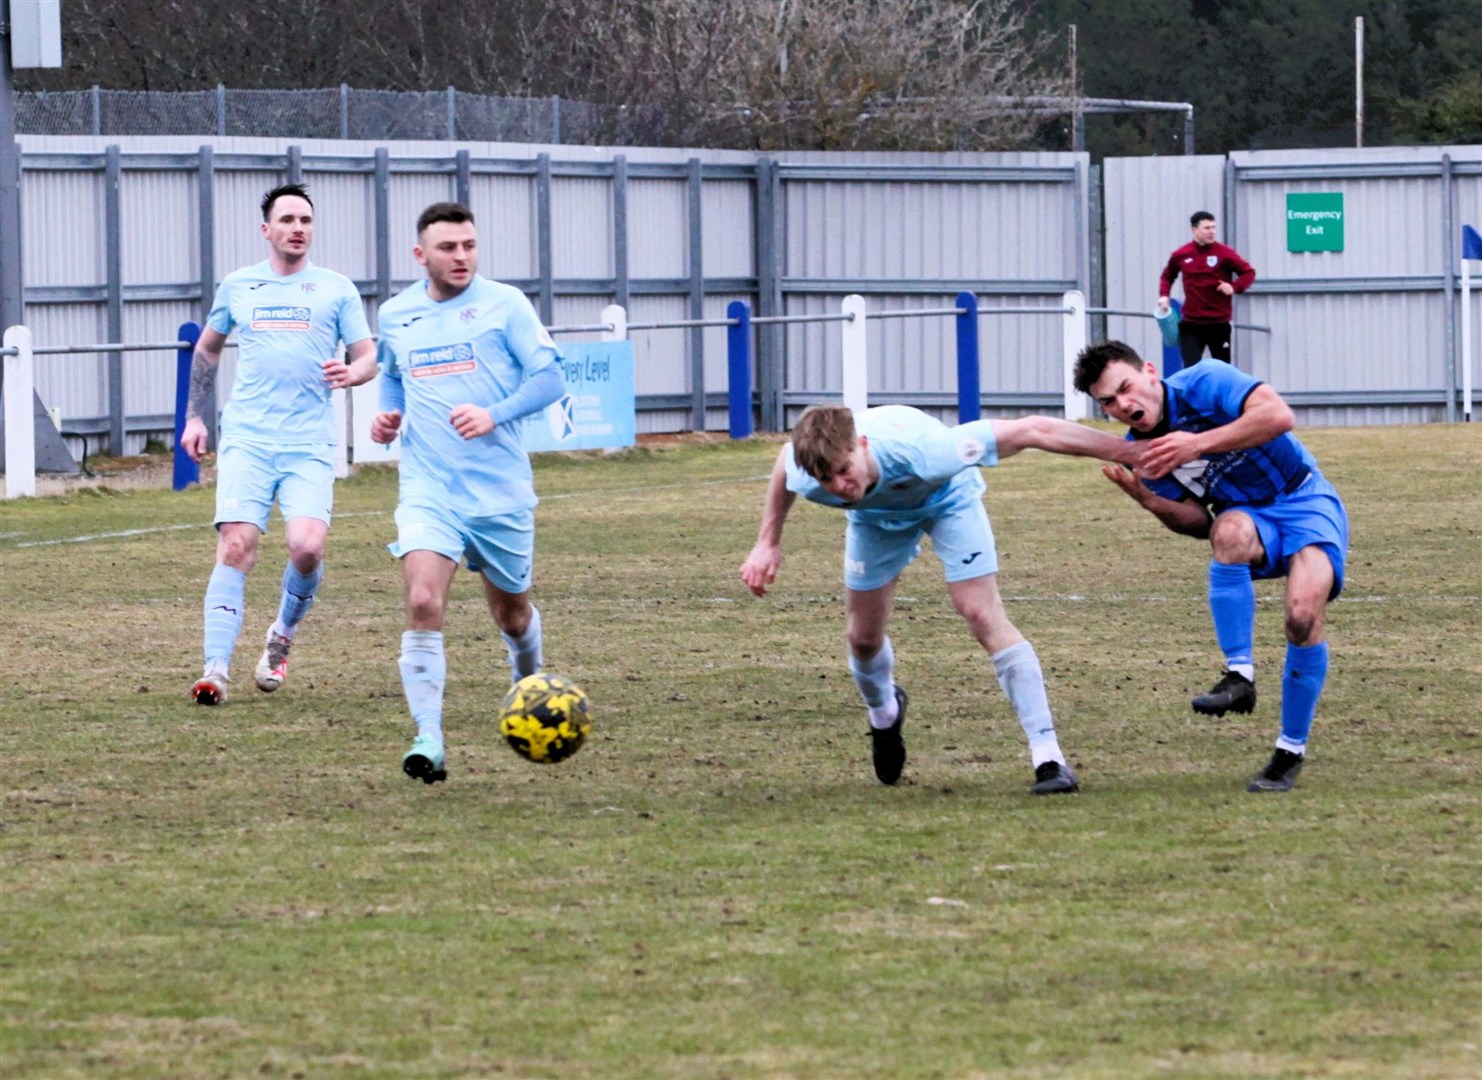 Ross Logan (right) takes a painful blow as he is held off in challenge for the ball on Saturday at Seafield Park.